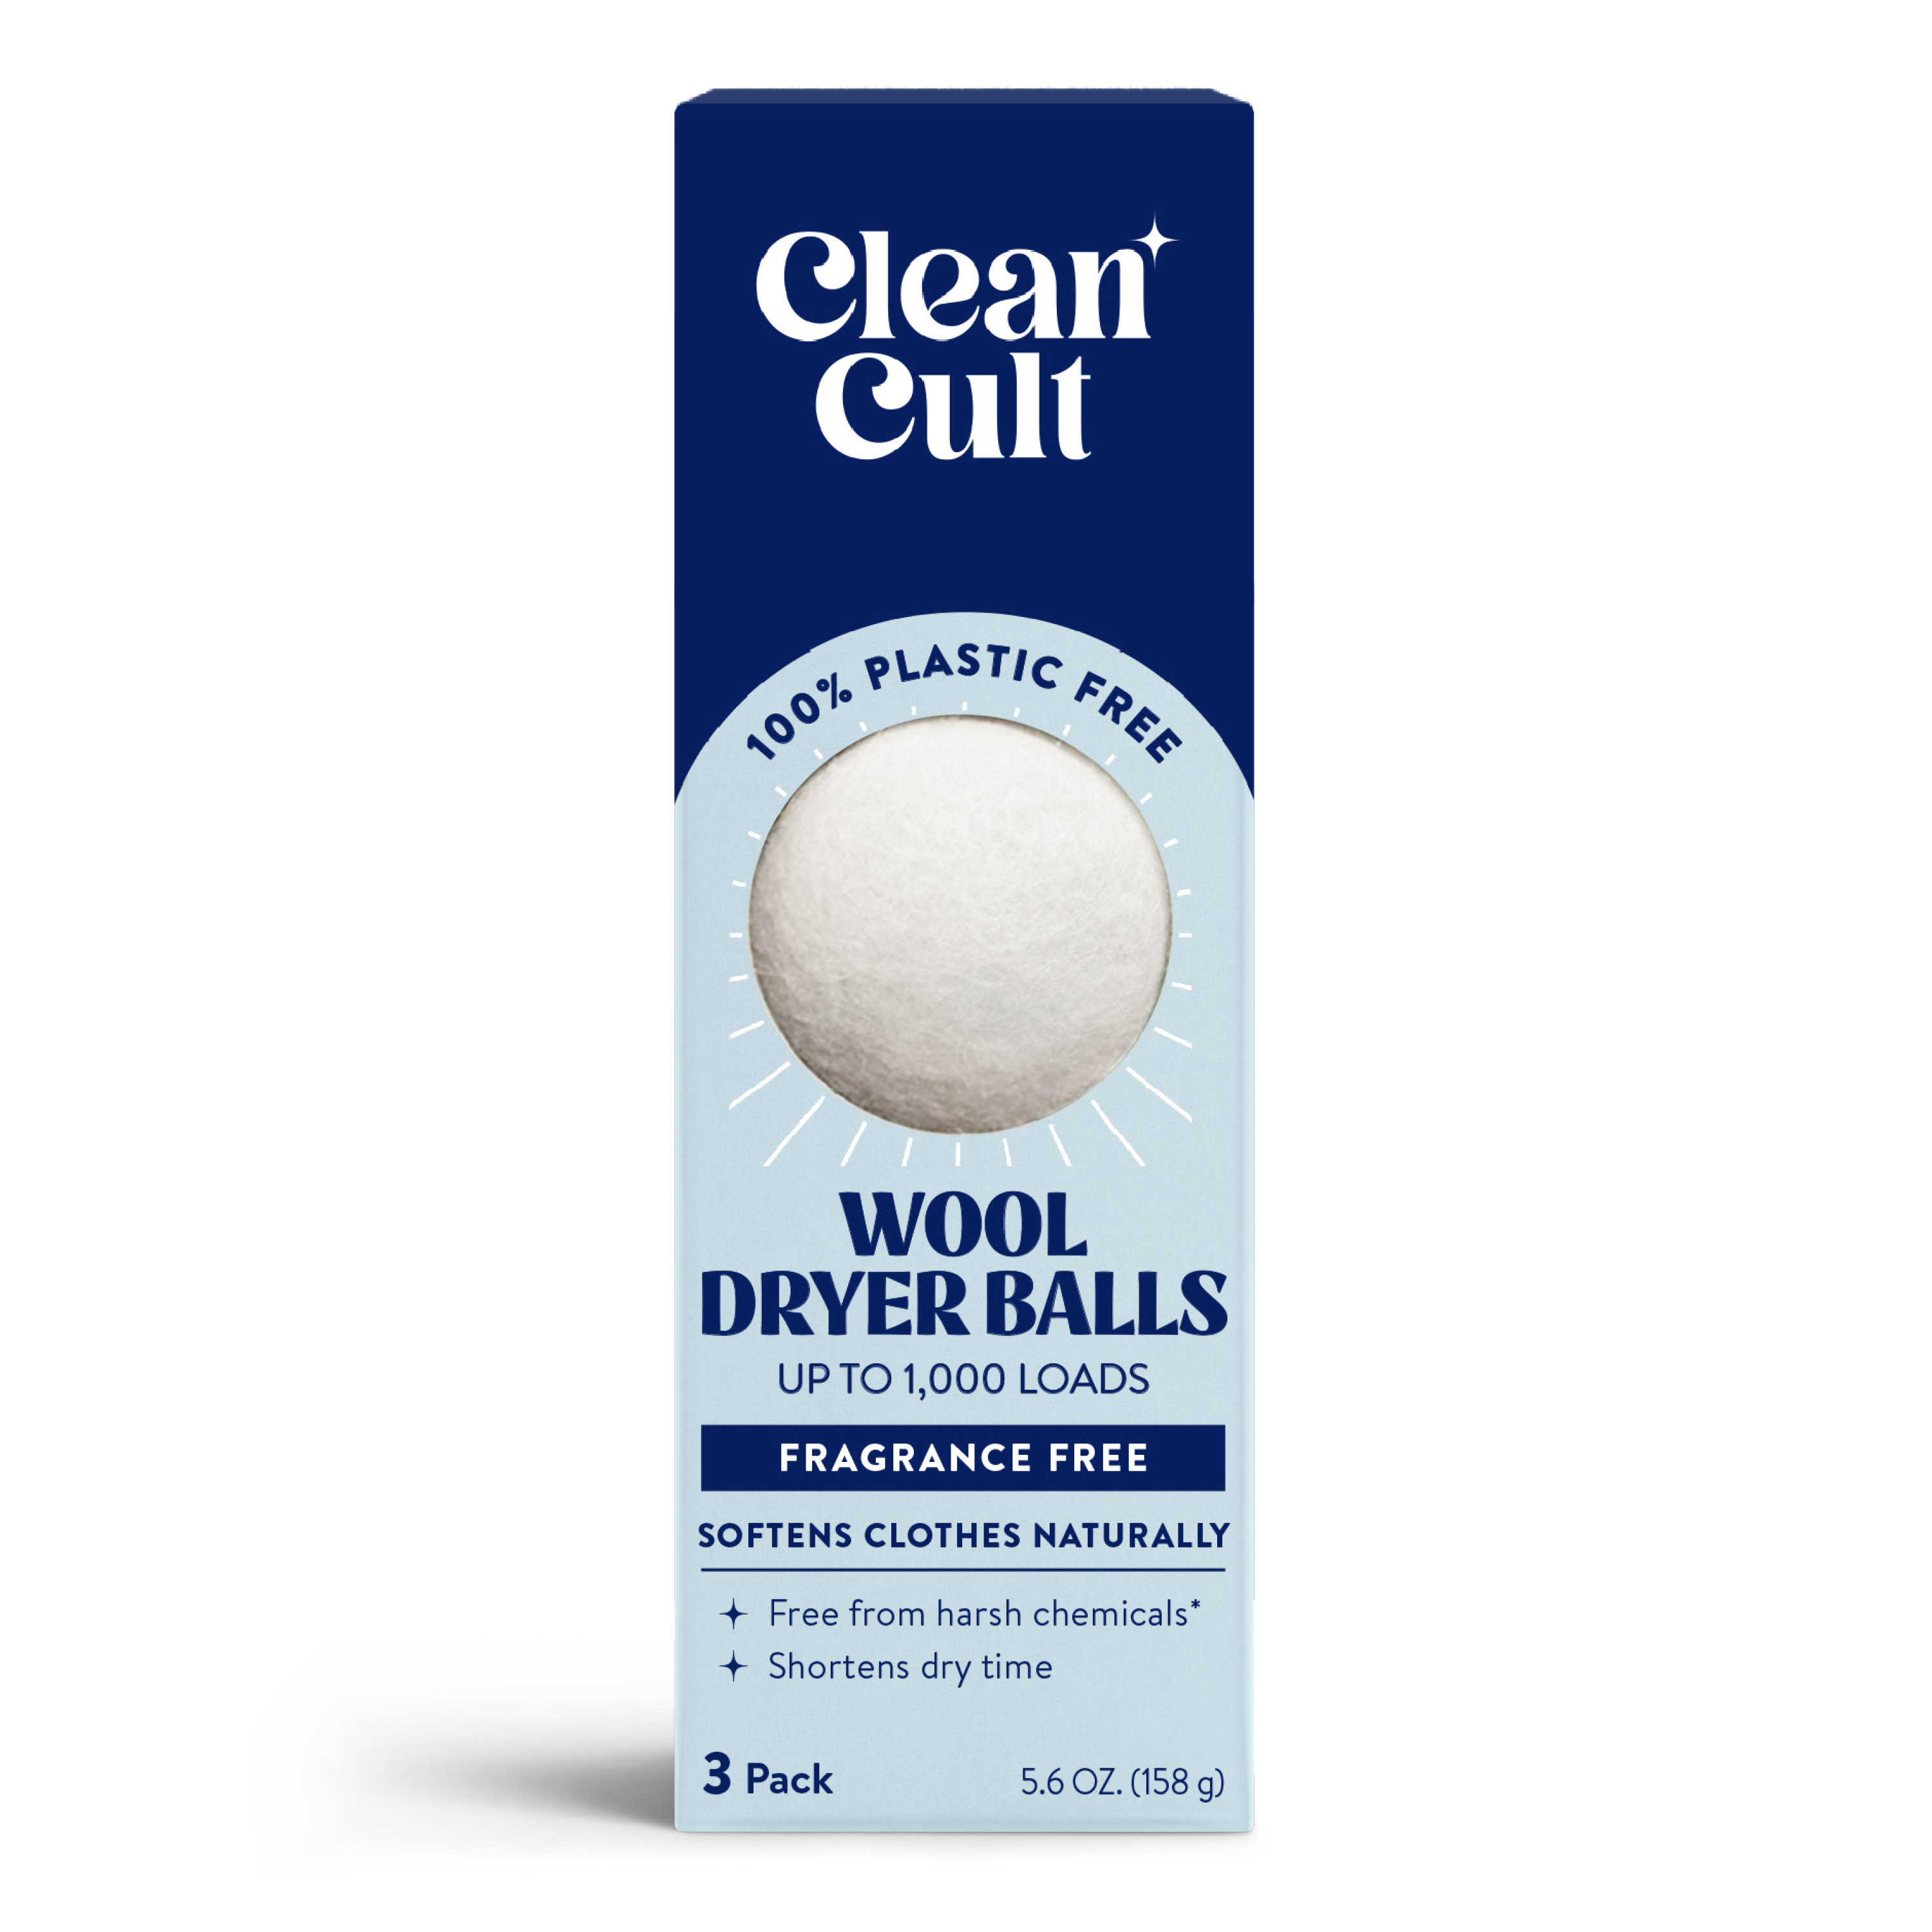 Cleancult Dryer Balls, Organic Wool, Reusable, Reduces Wrinkles, Unscented, 3 Count - image 1 of 7